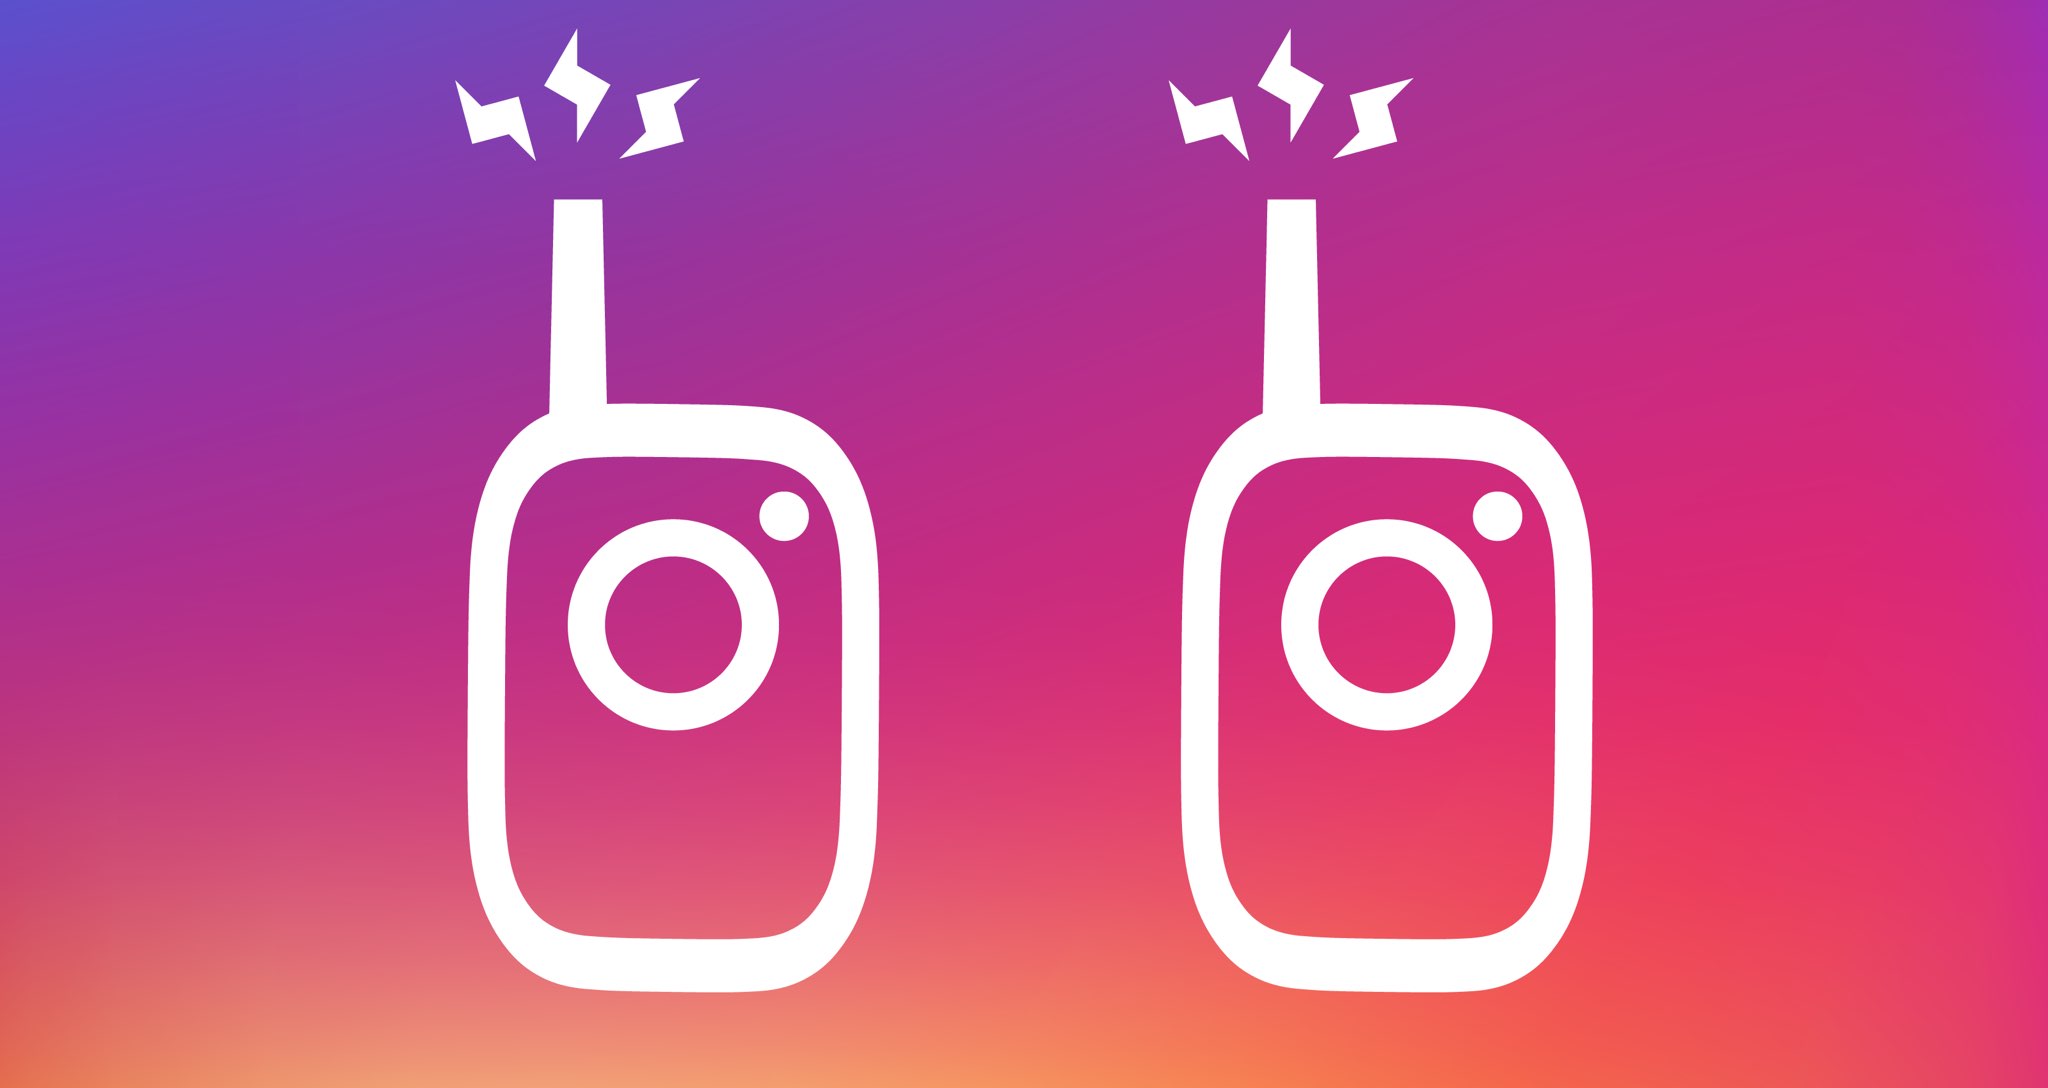 Instagram is shutting down its standalone direct messaging app